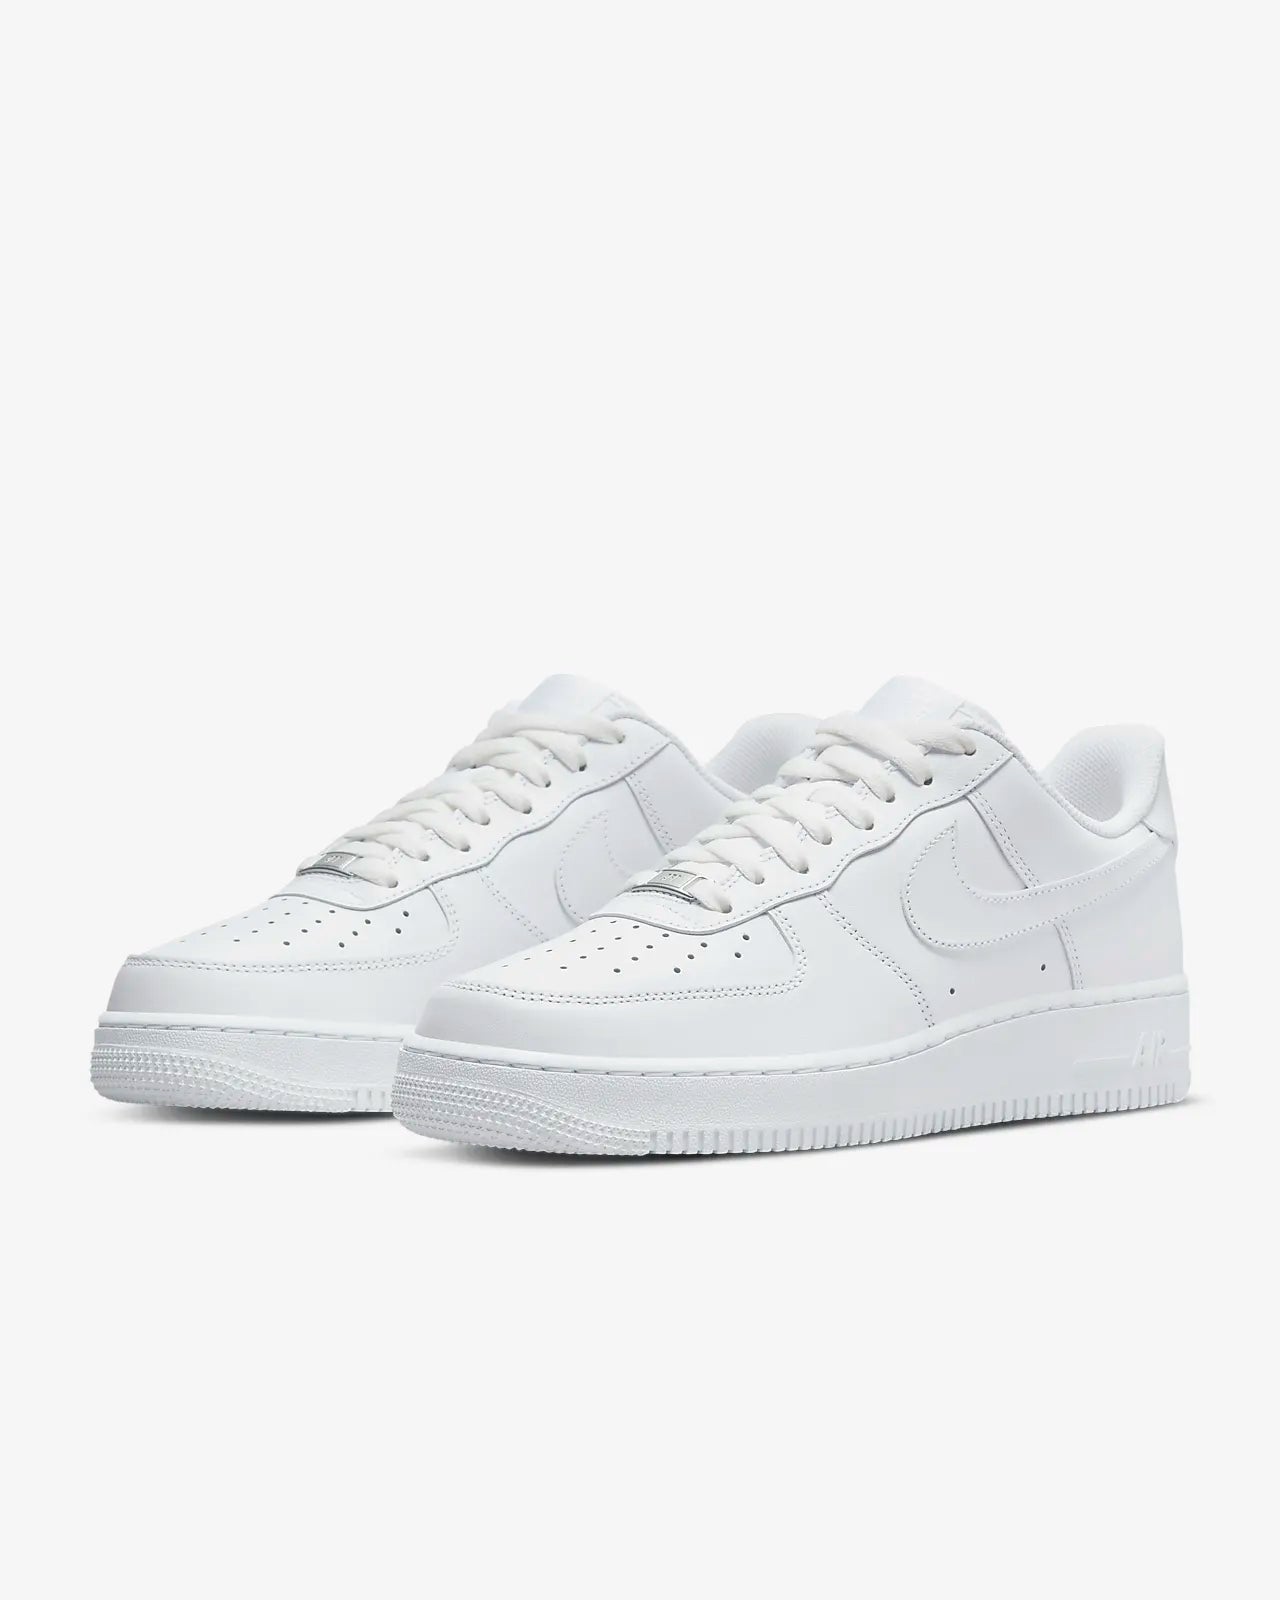 Nike Air Force 1 '07 – Affinity